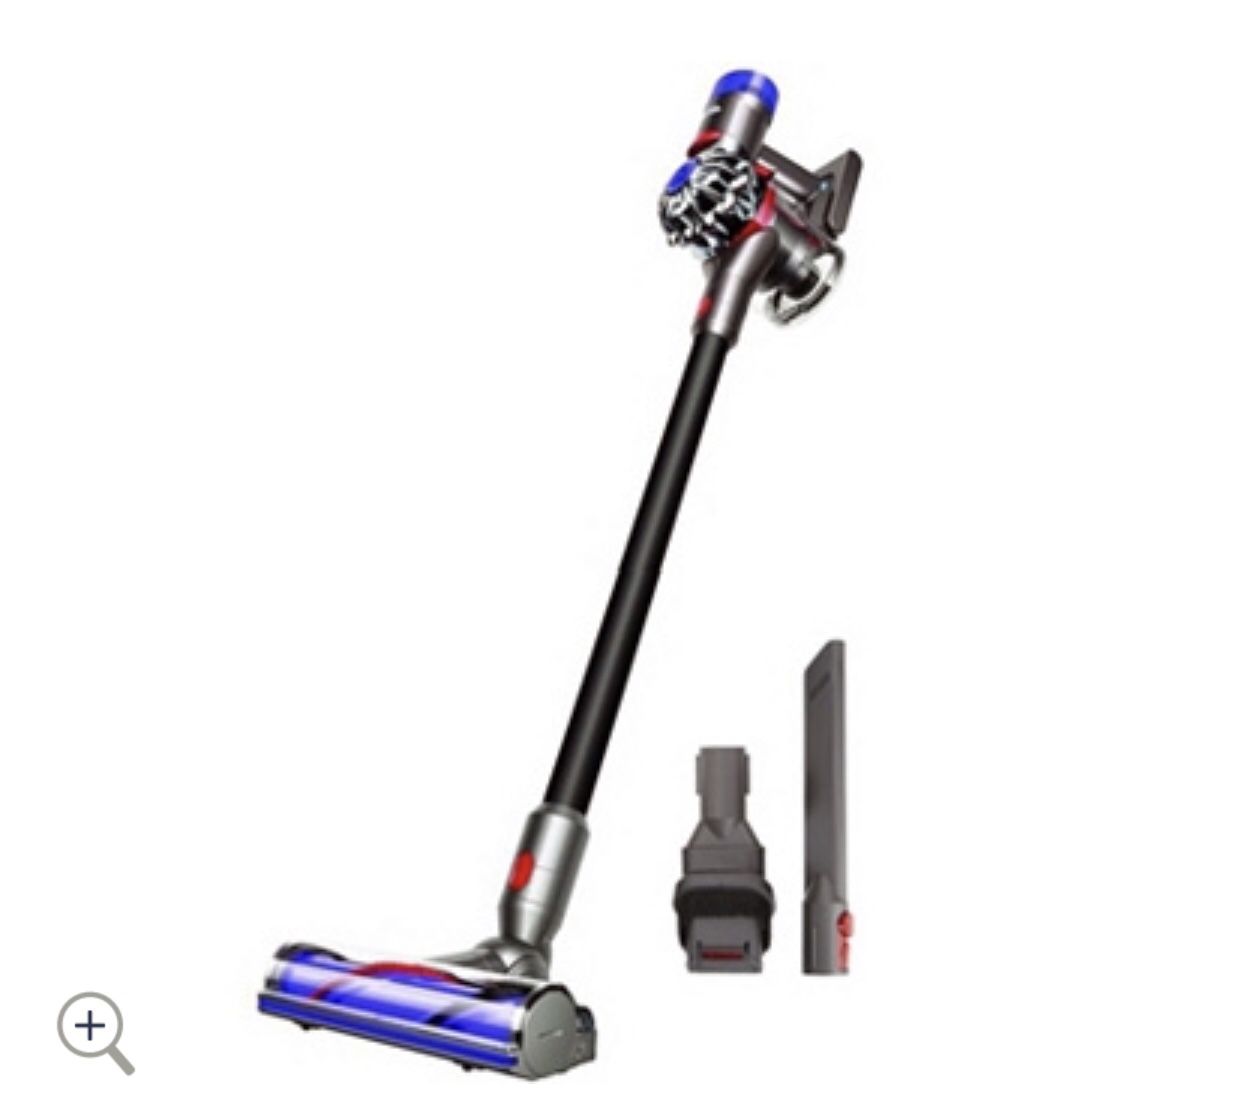 Dyson V8 Motorhead Cordfree Vacuum with Tools and HEPA Filtration